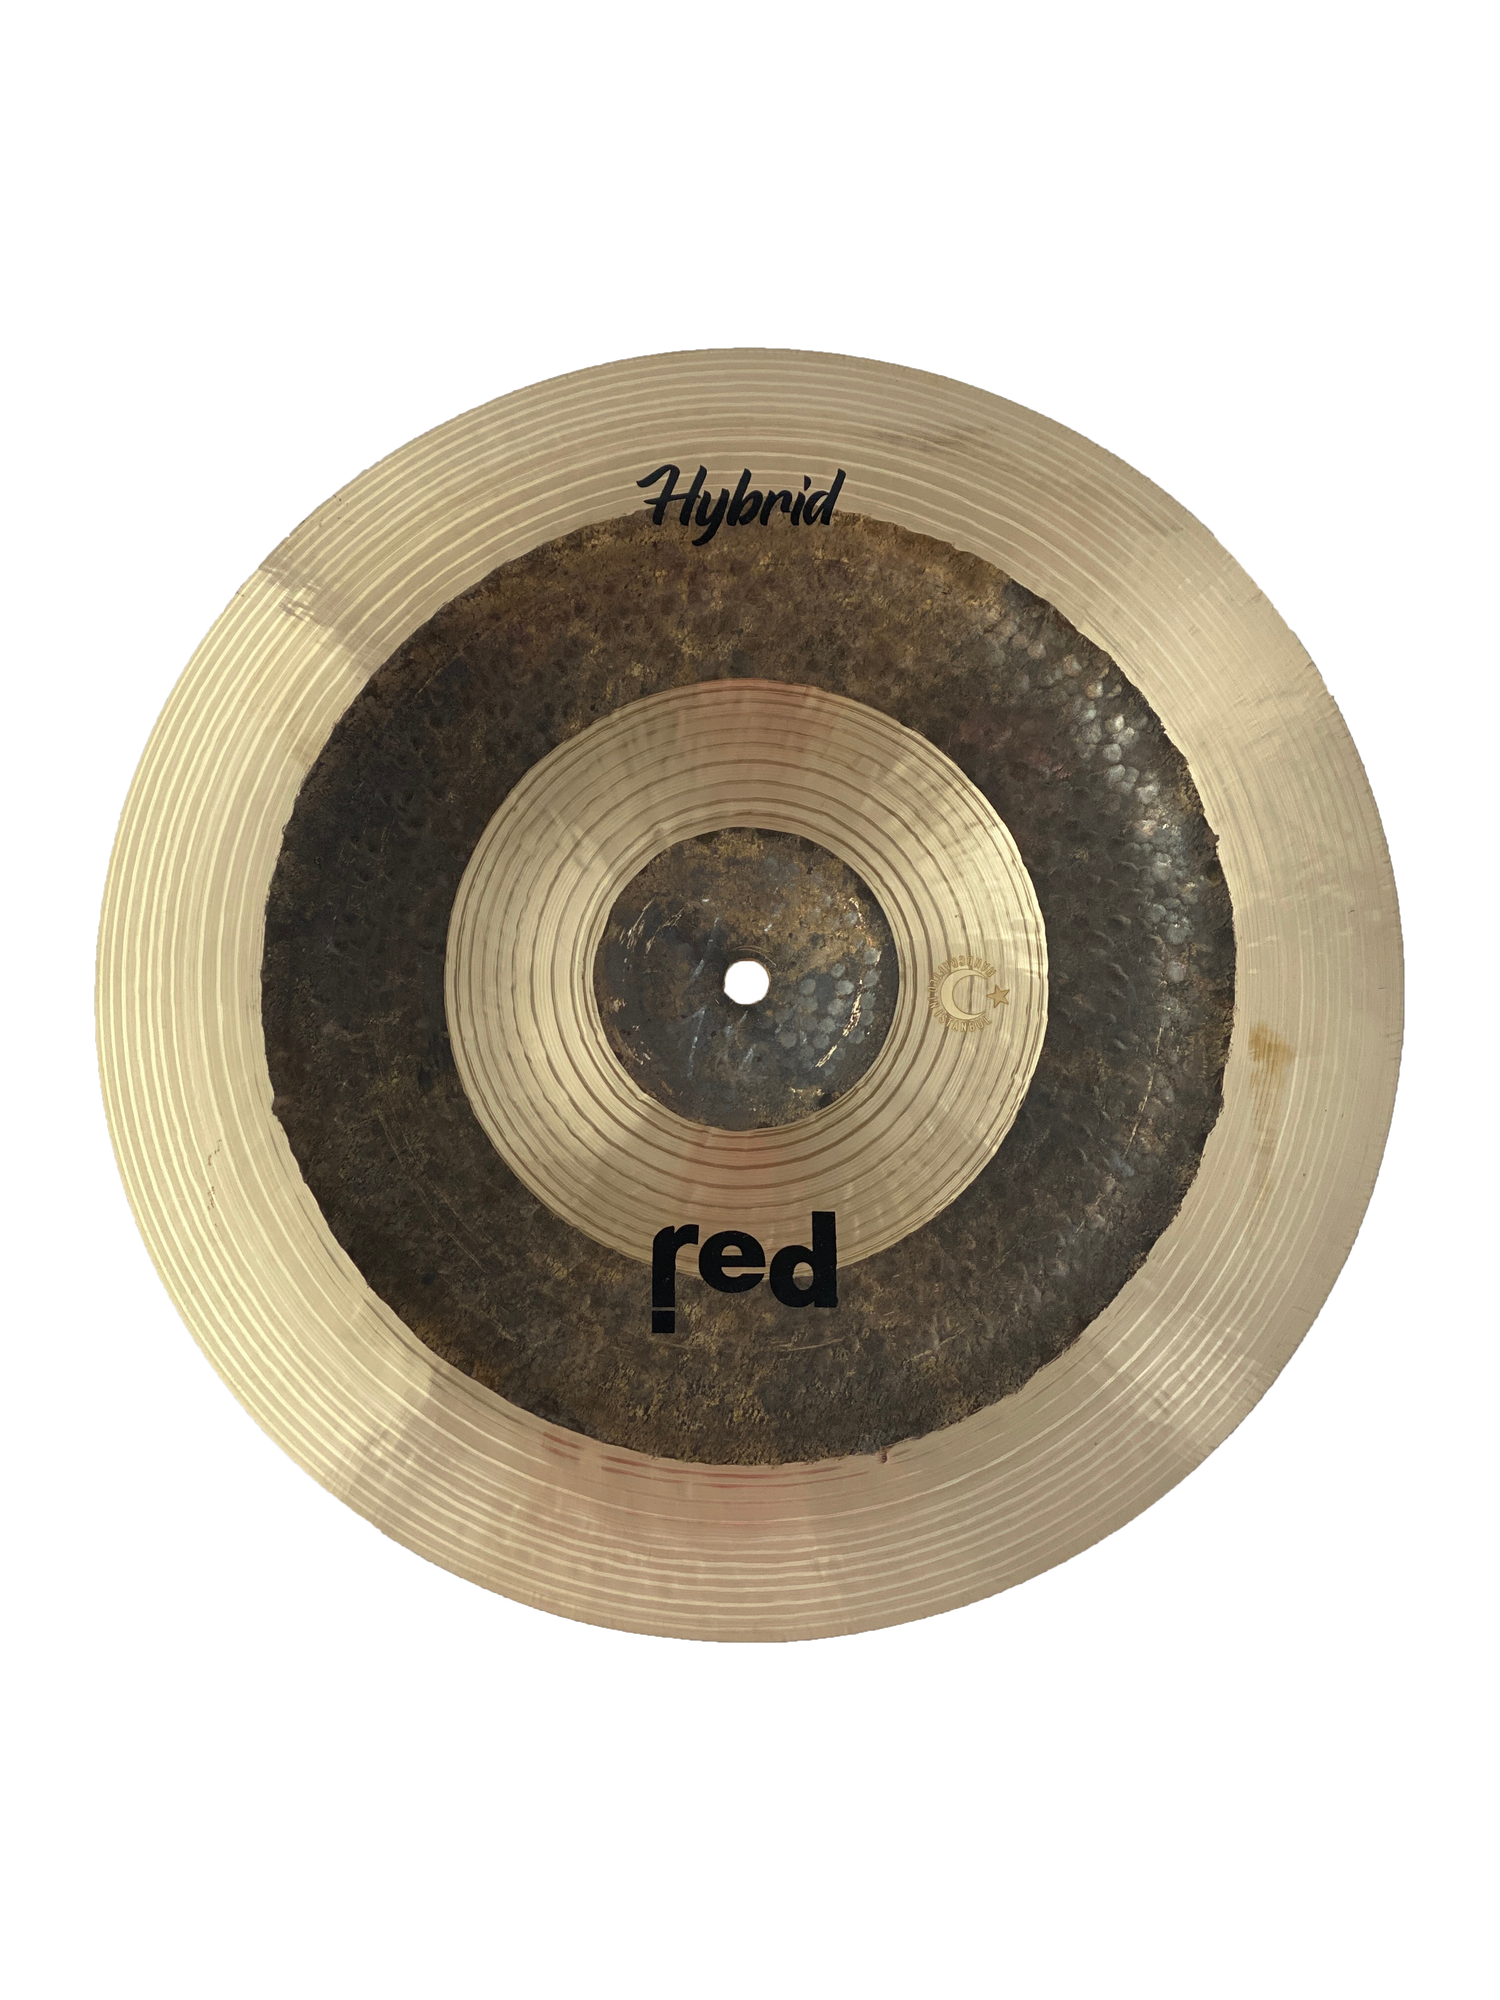 Red　Sale　Cymbals　on